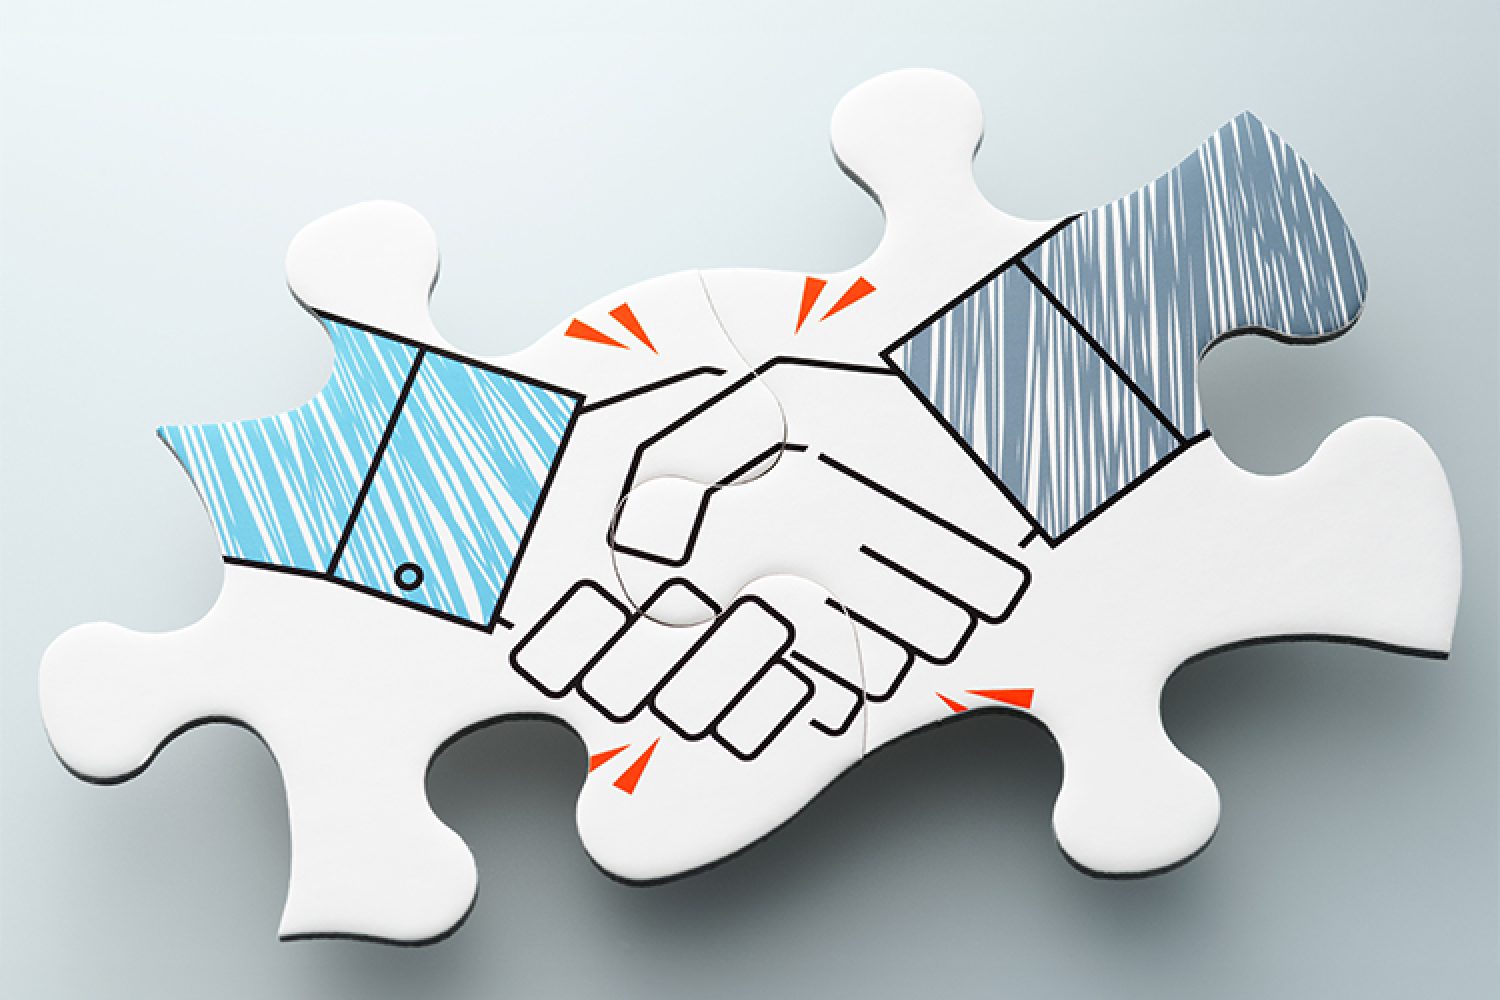 Concept image of business partnership, collaboration and corporation.